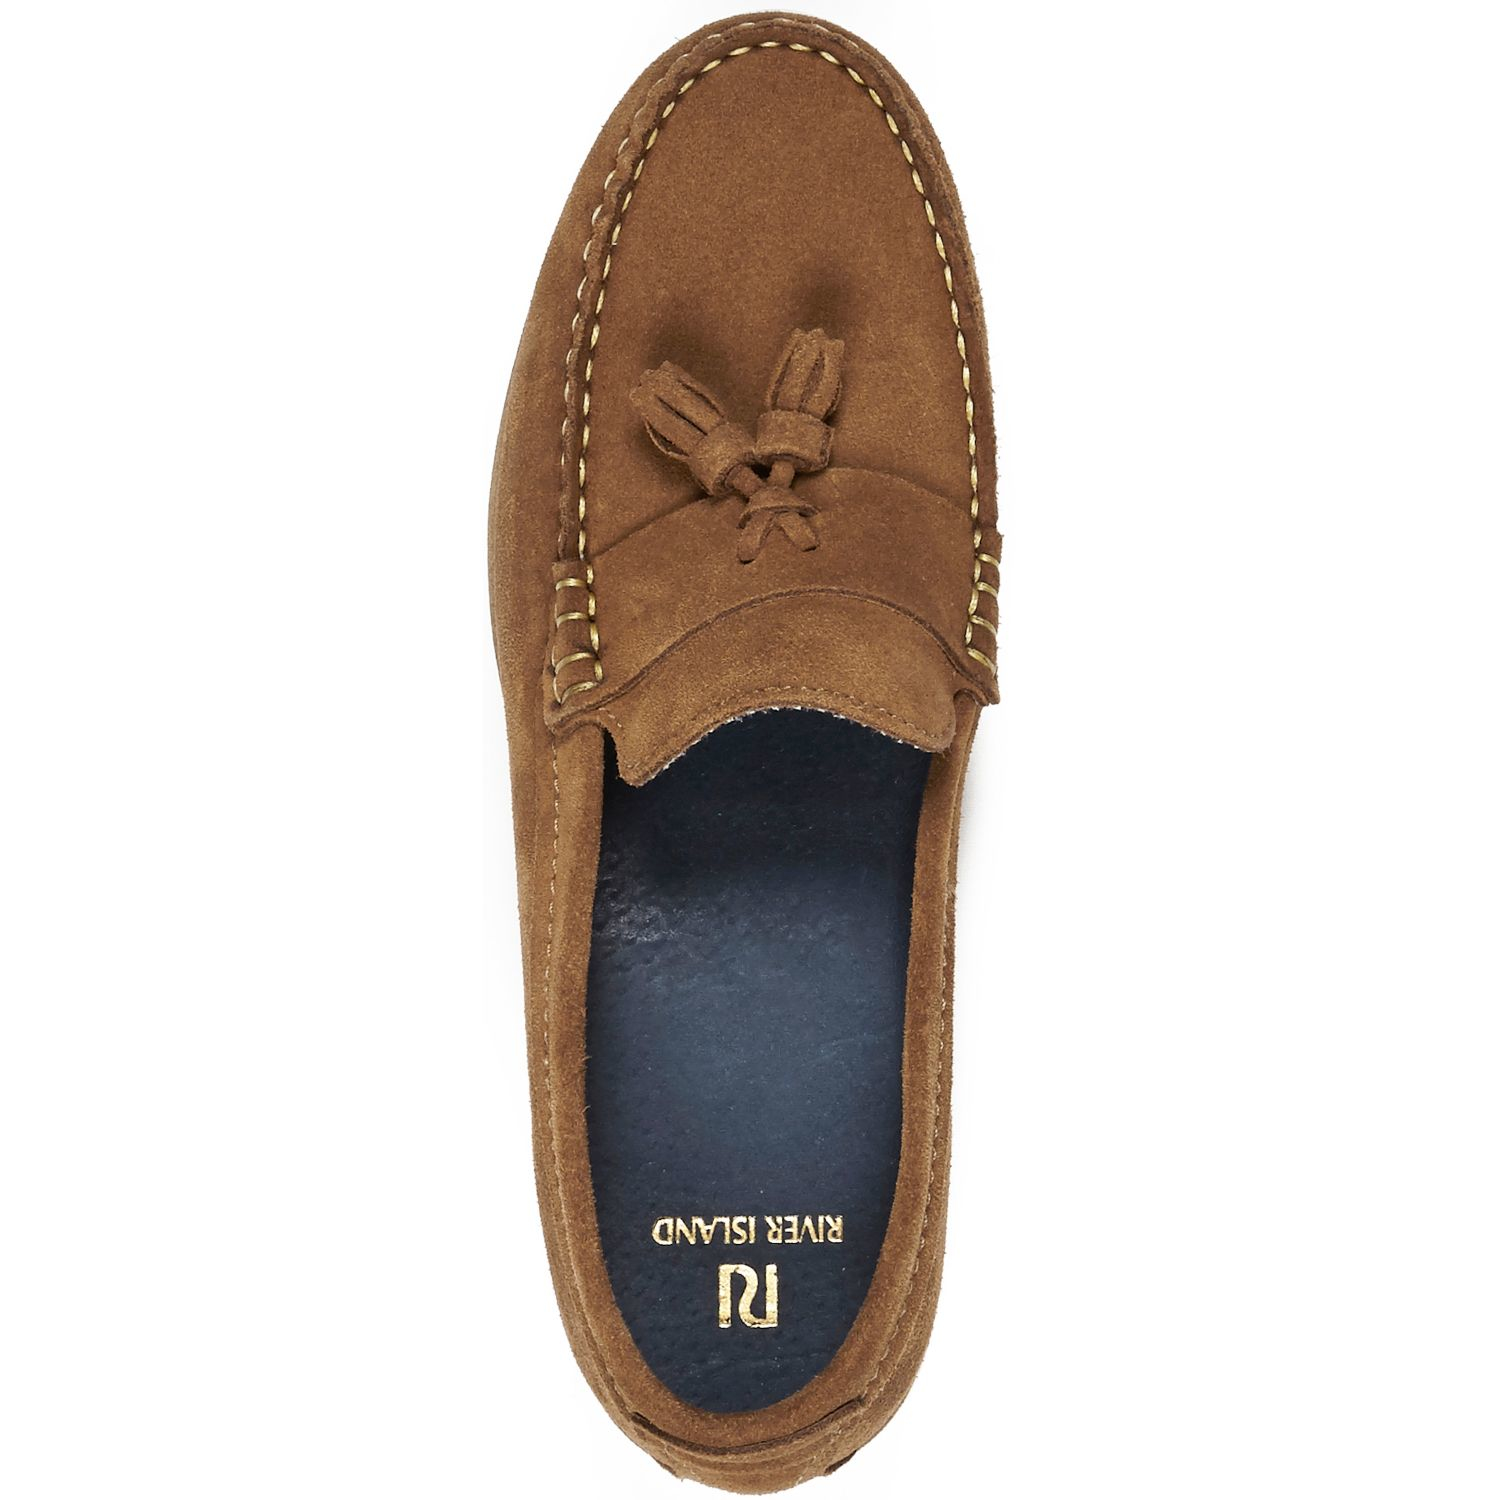 River Island Brown Suede Tassel Boat Shoes for Men - Lyst